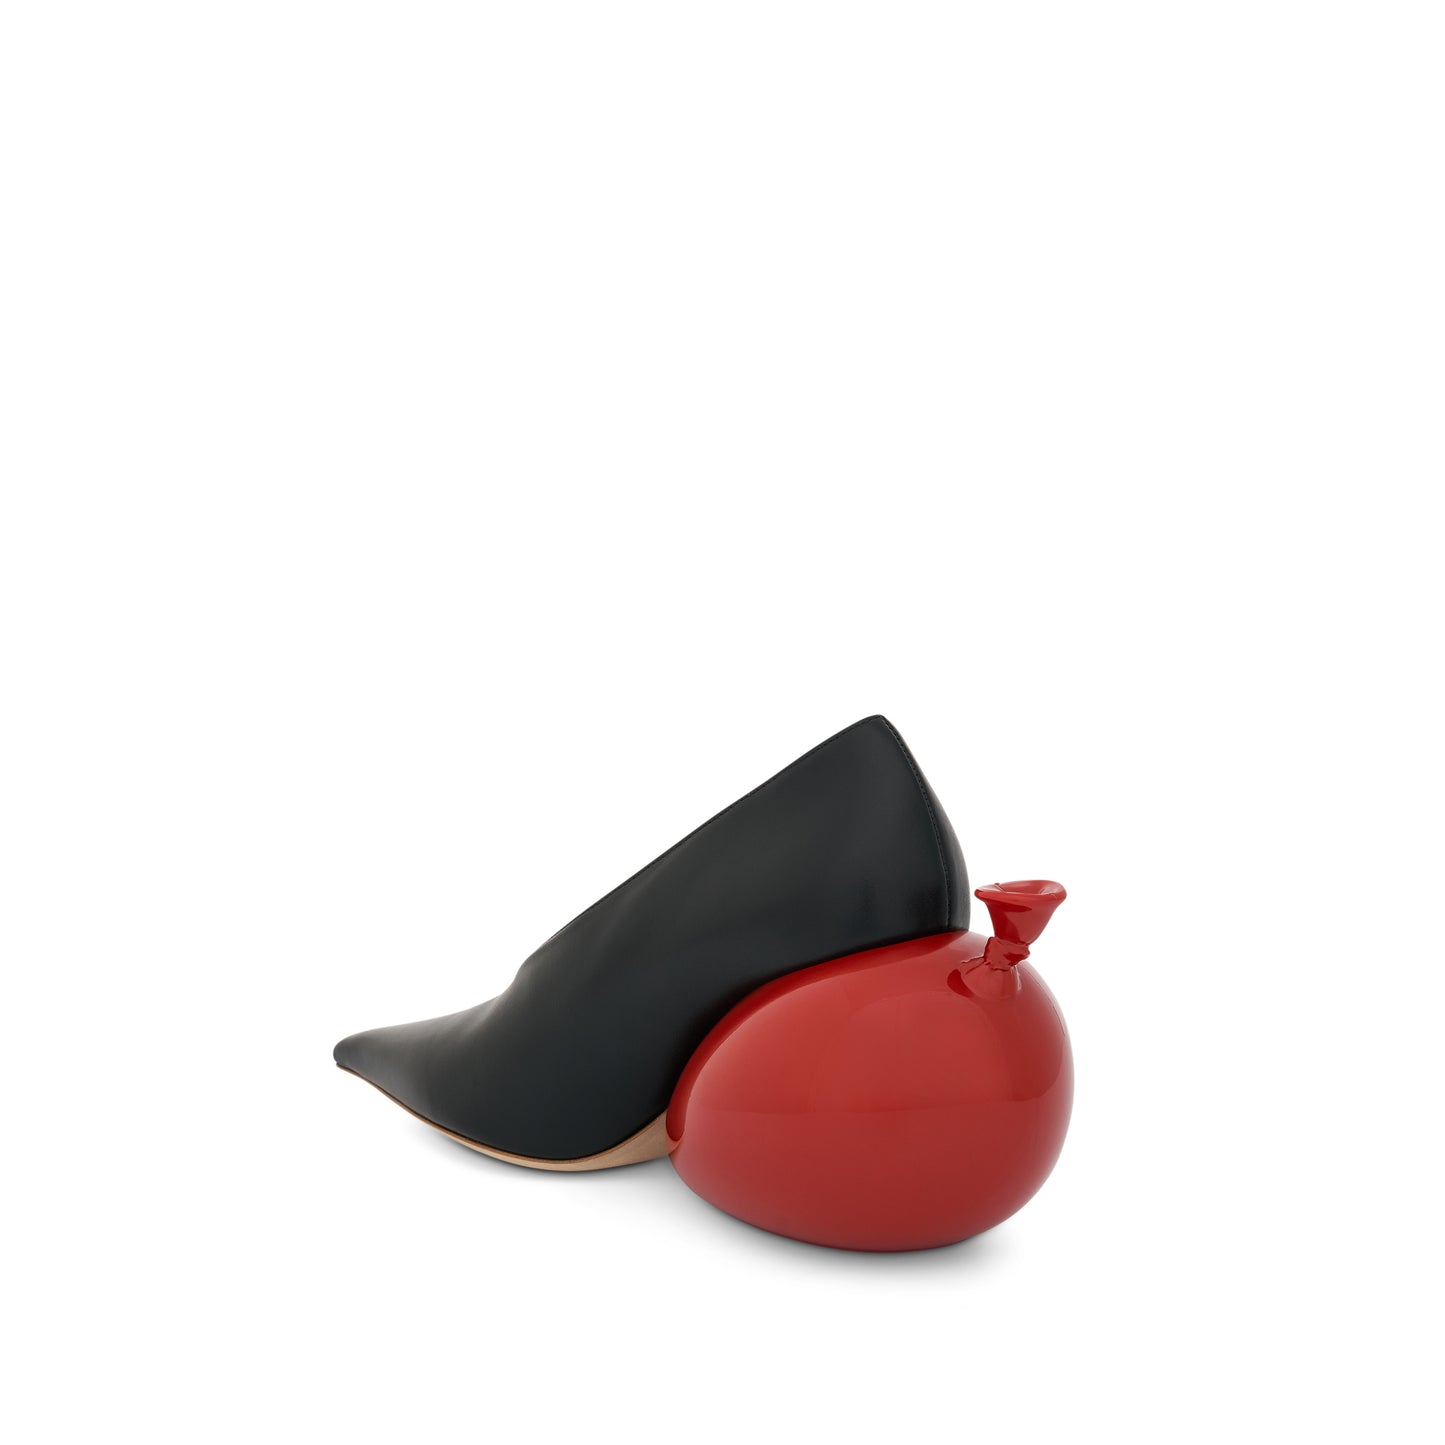 Balloon Pump in Black/Red